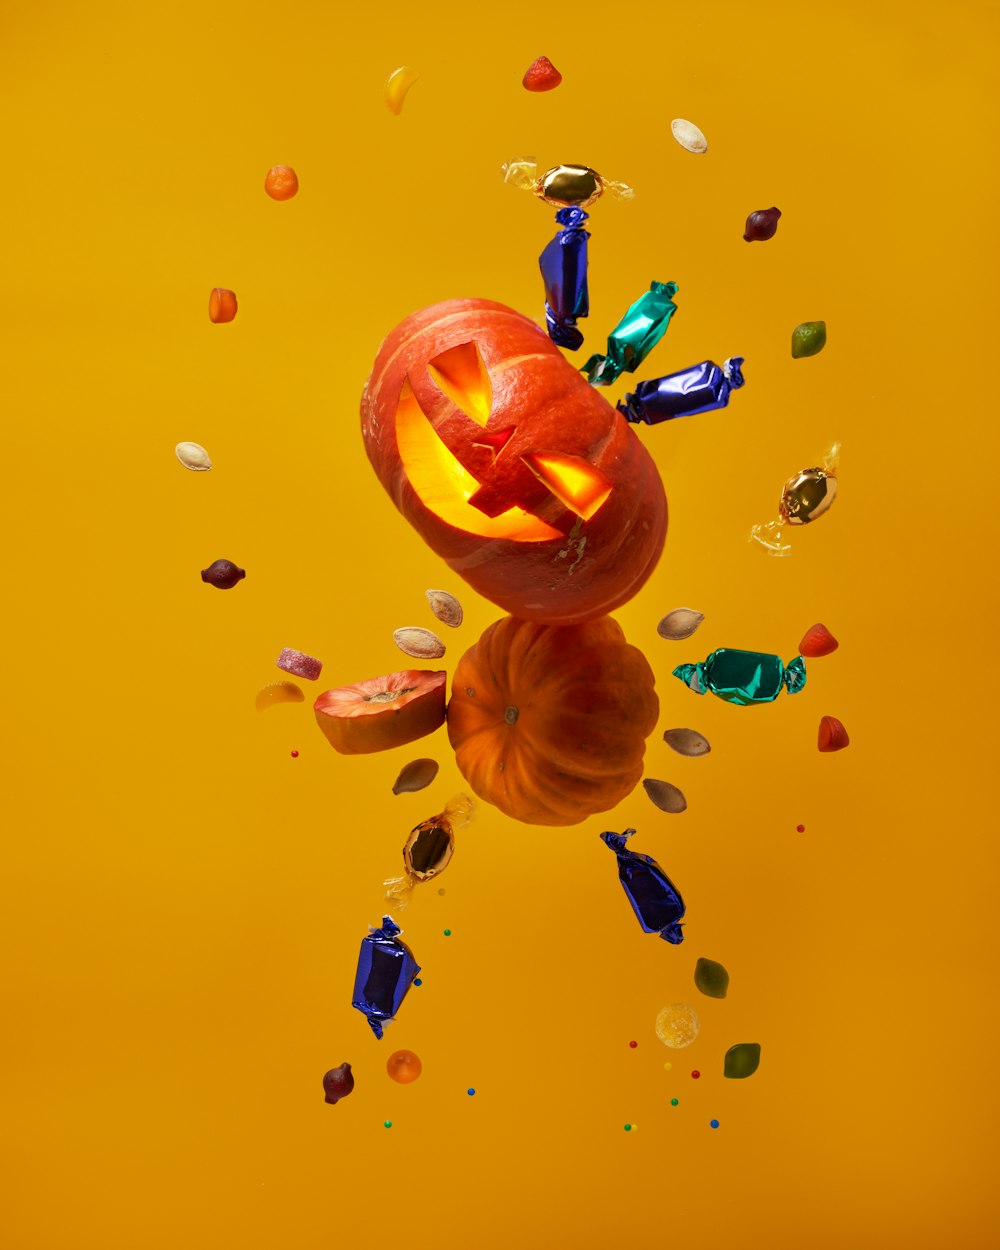 a jack - o'- lantern is surrounded by confetti and confe